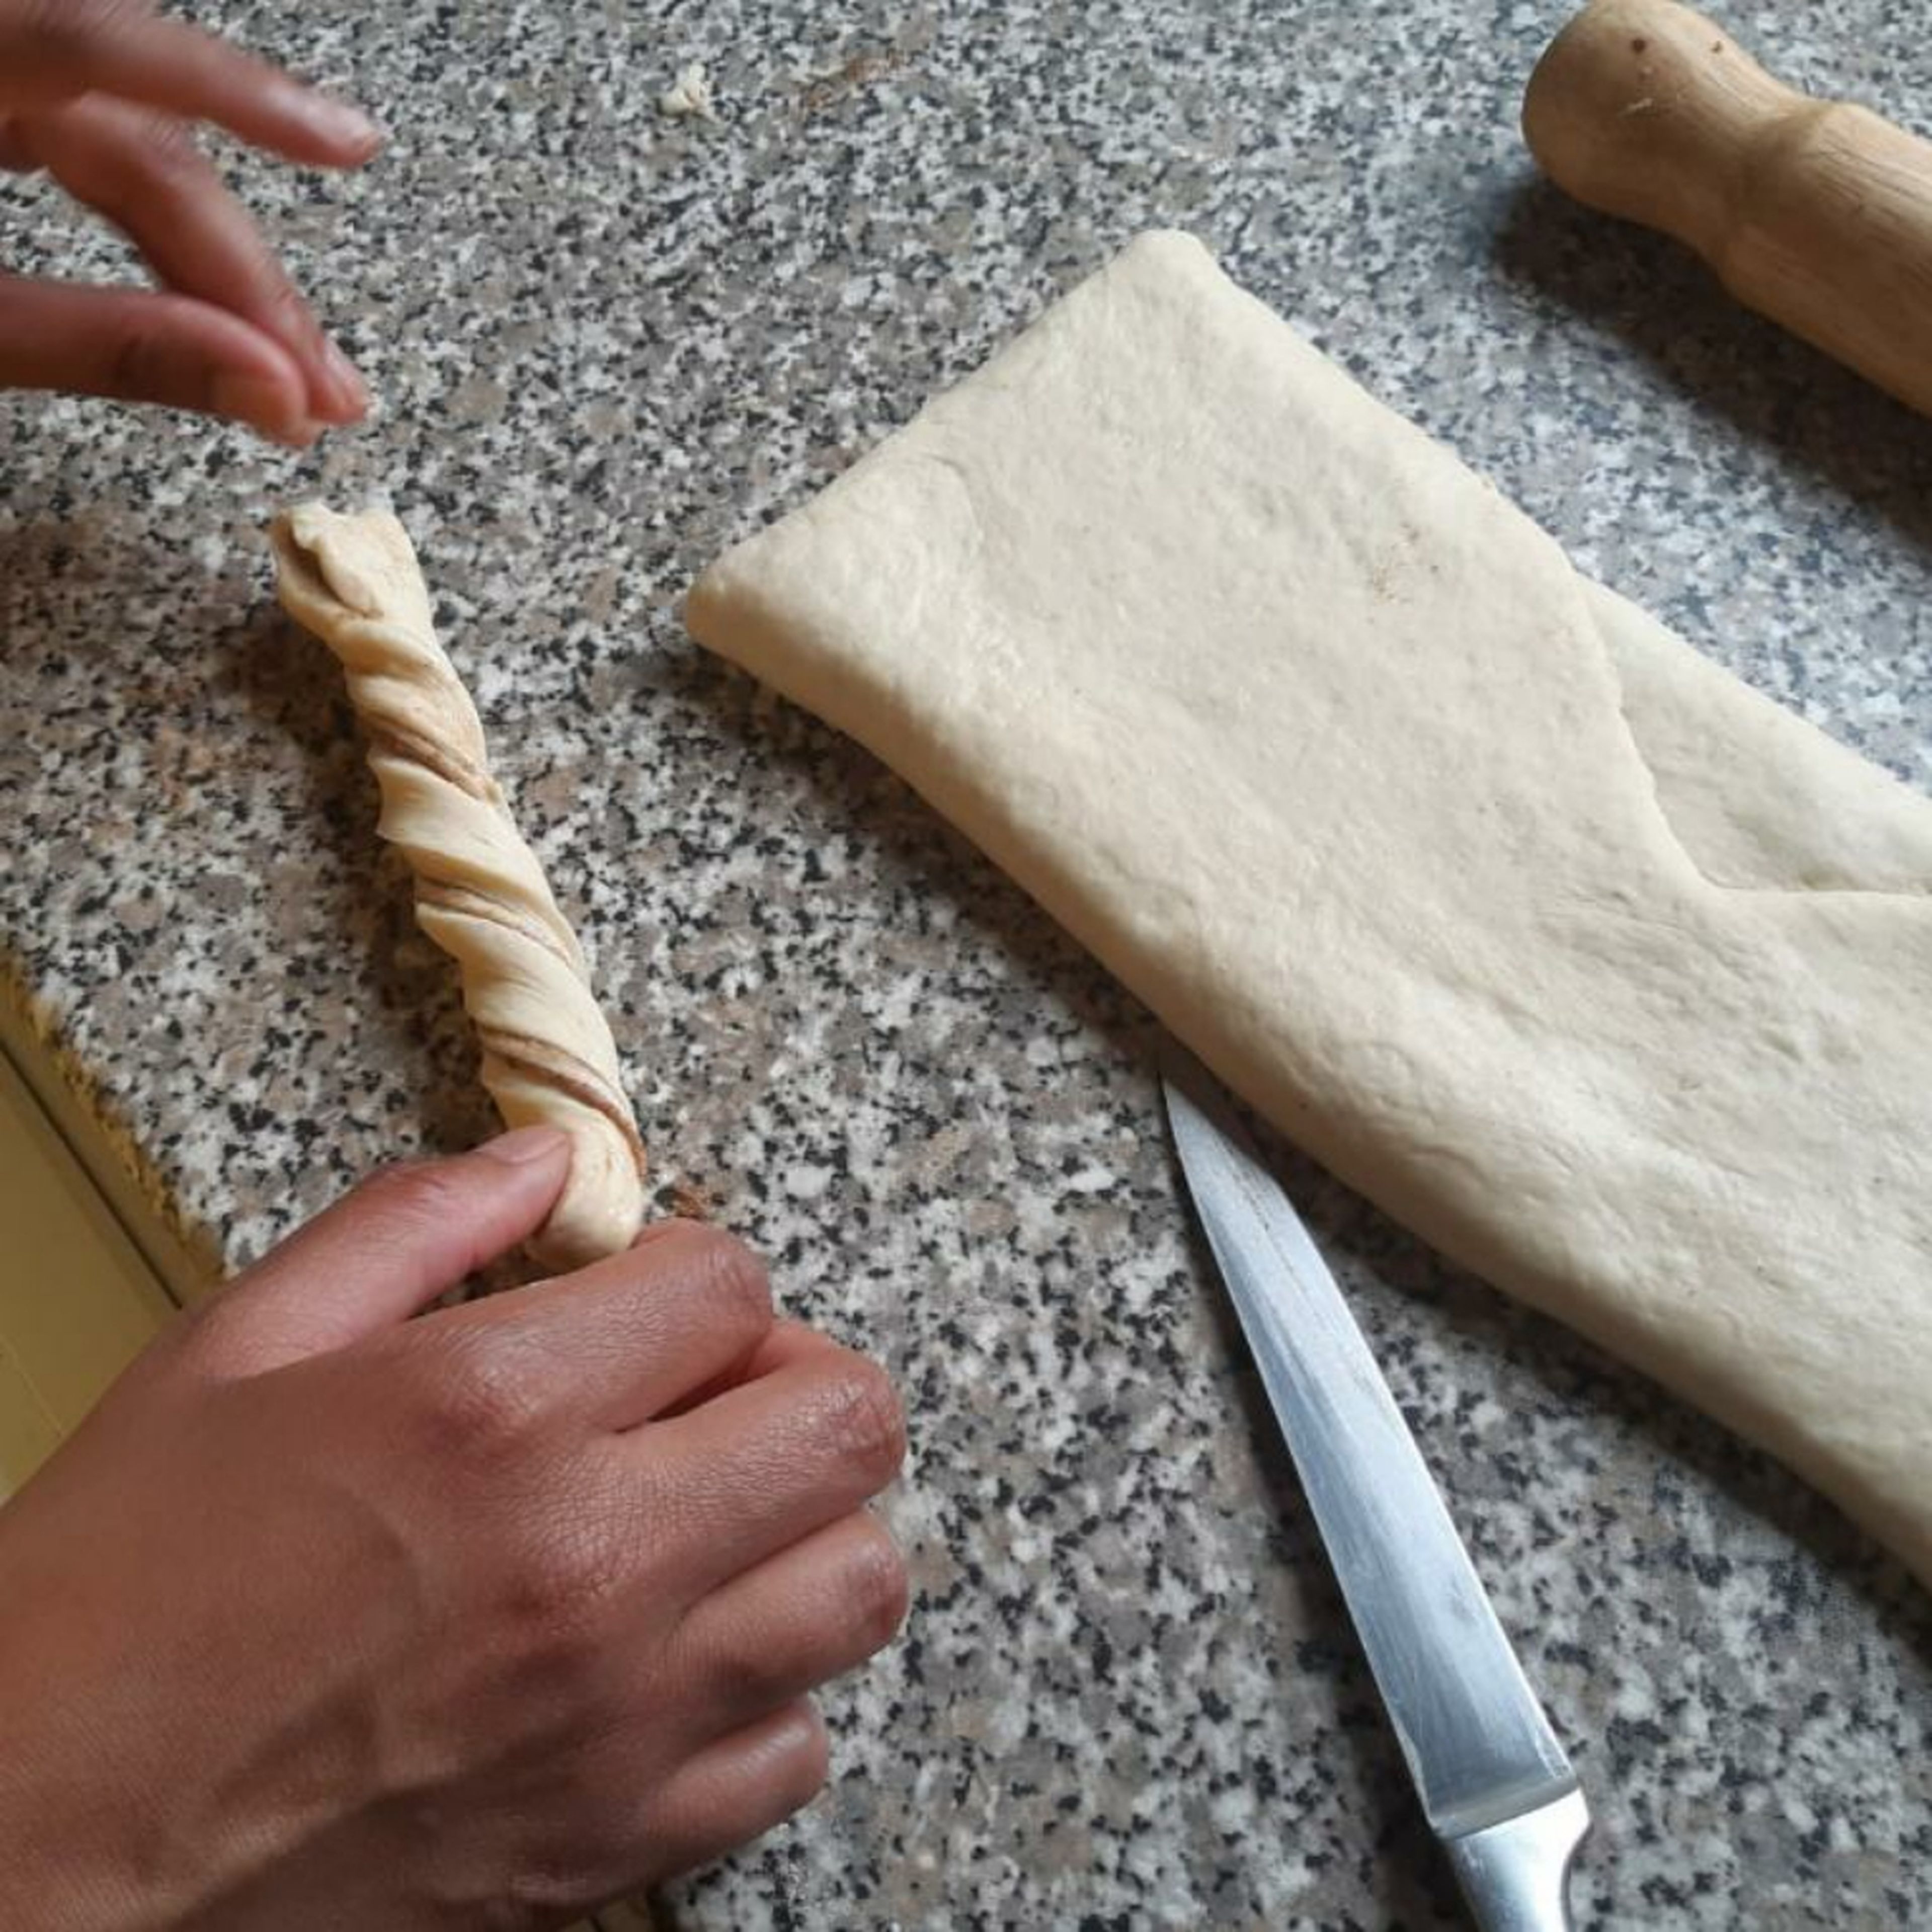 Grab one end and twist, whilst slightly stretching from the other end (don't over stretch, causing the dough to separate). (Number of buns dependen the size of dough rolled and strips cut).